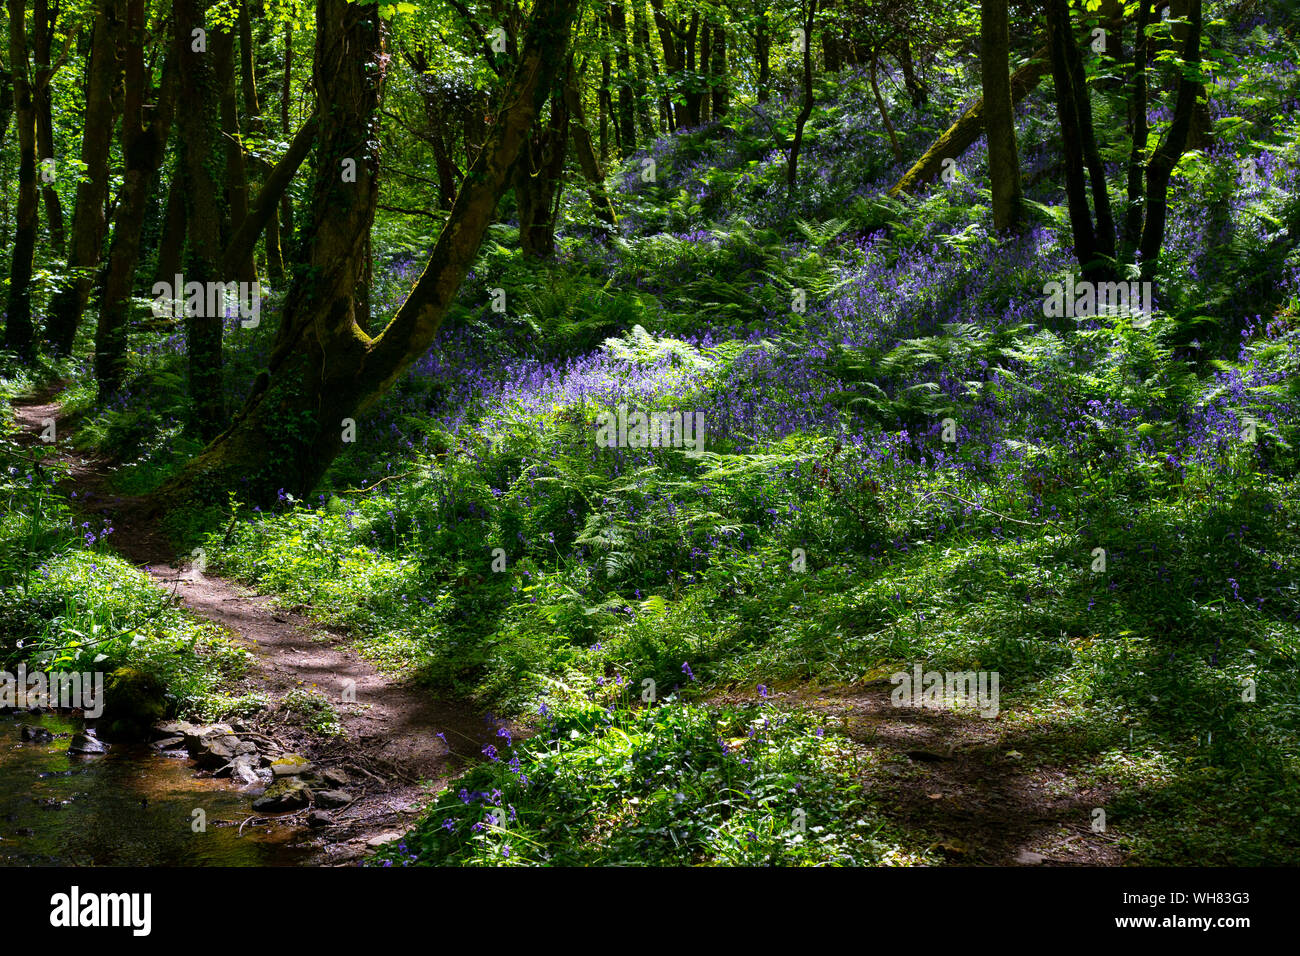 A beautiful English bluebell wood lit by sun penetrating the woodland canopy in mid-May Stock Photo